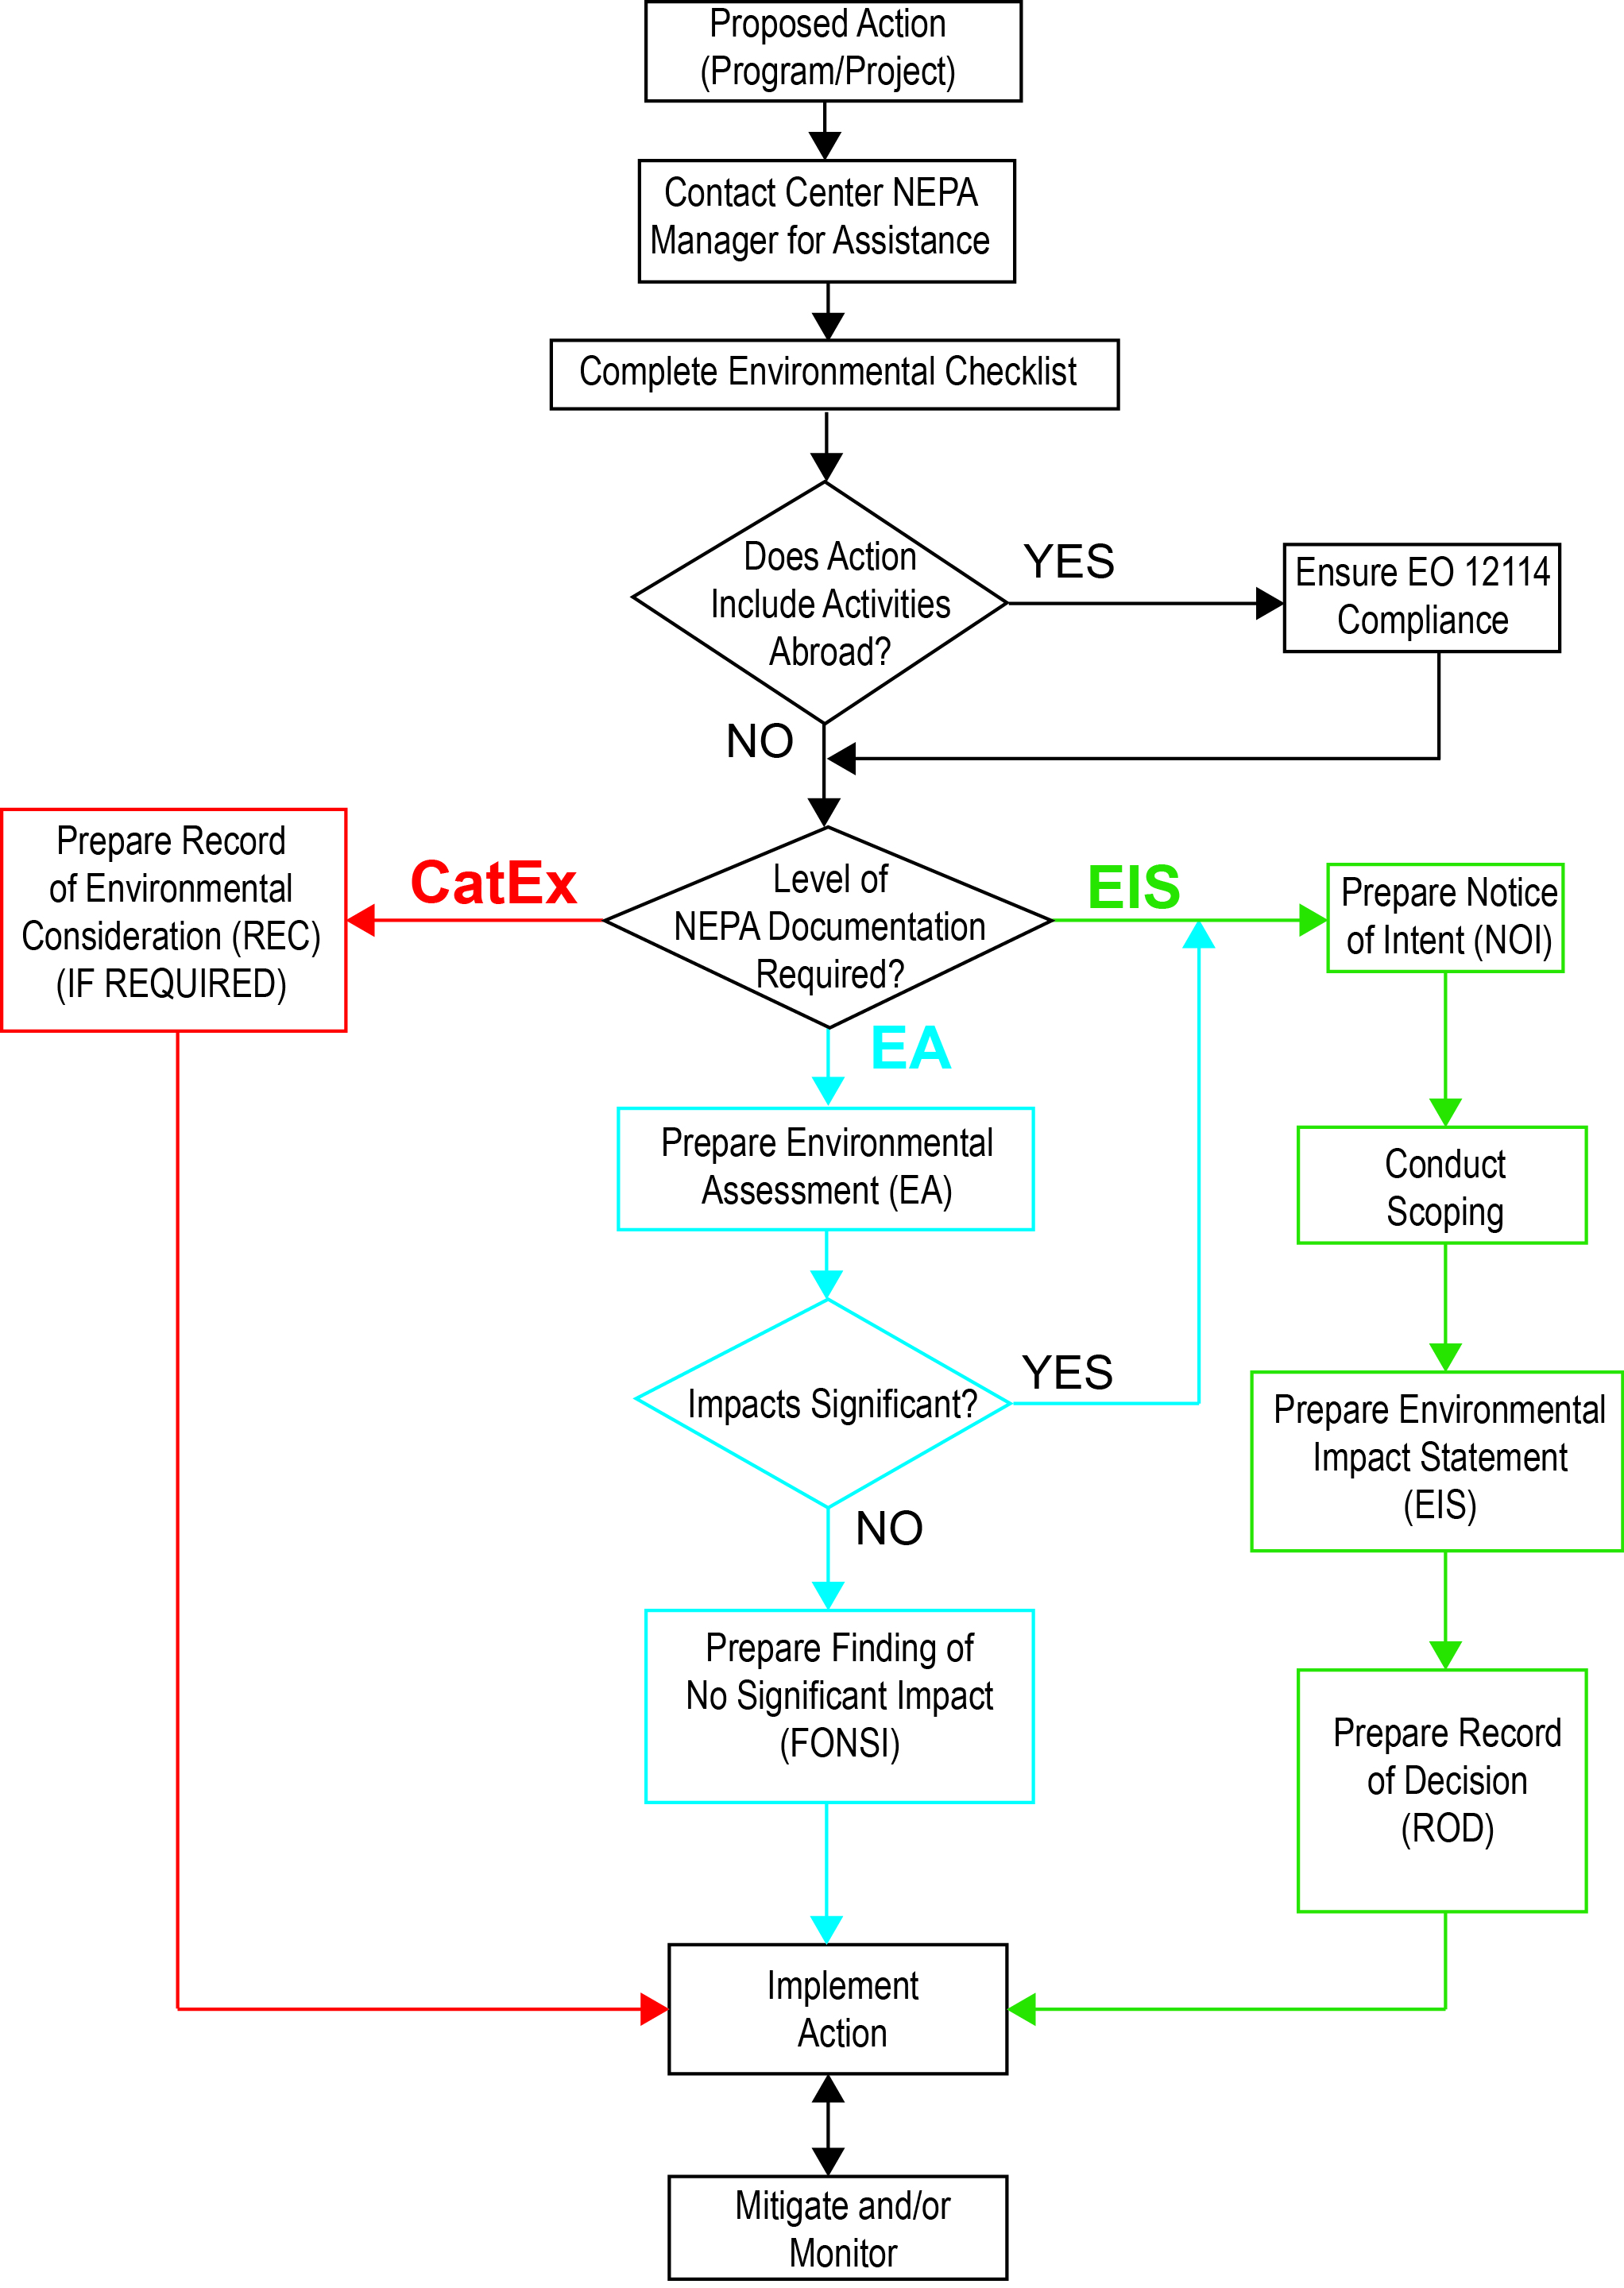 Appendix D flow charts depict the NEPA Process. Figure D-1 show the summary of the NEPA Process.